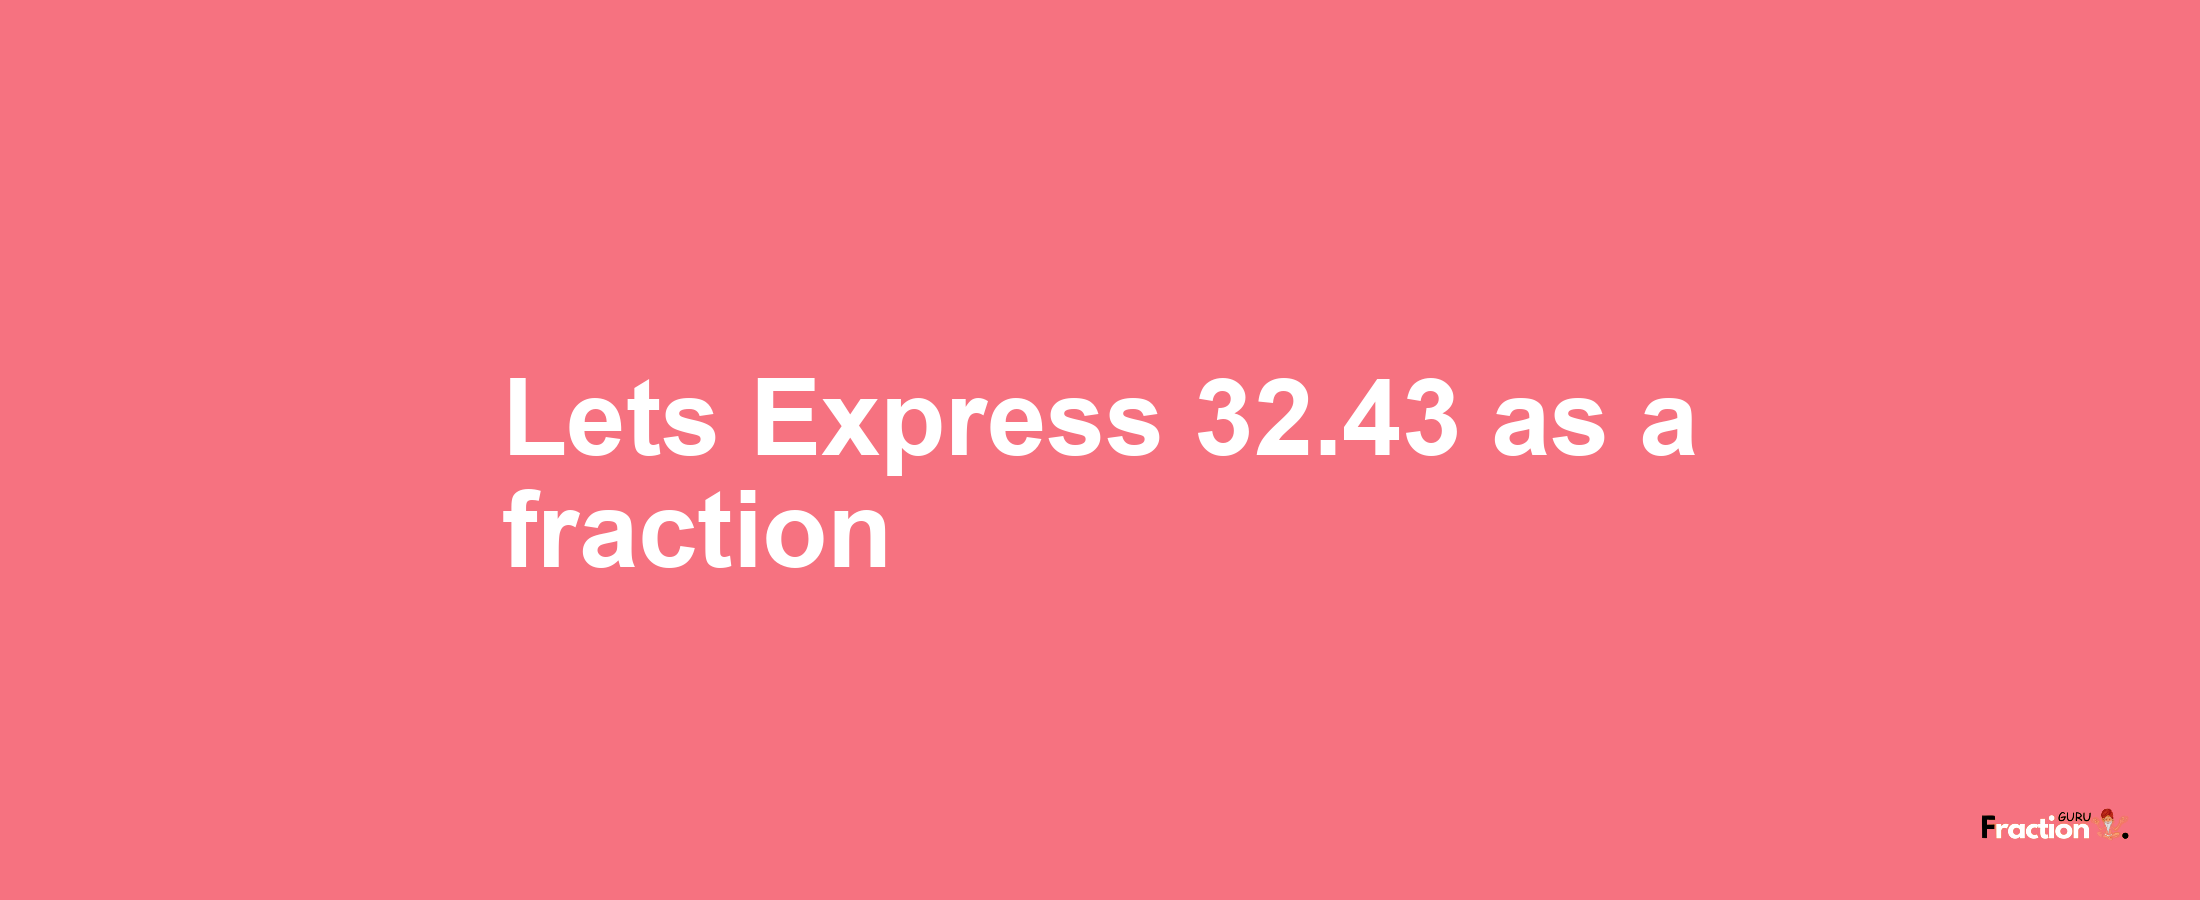 Lets Express 32.43 as afraction